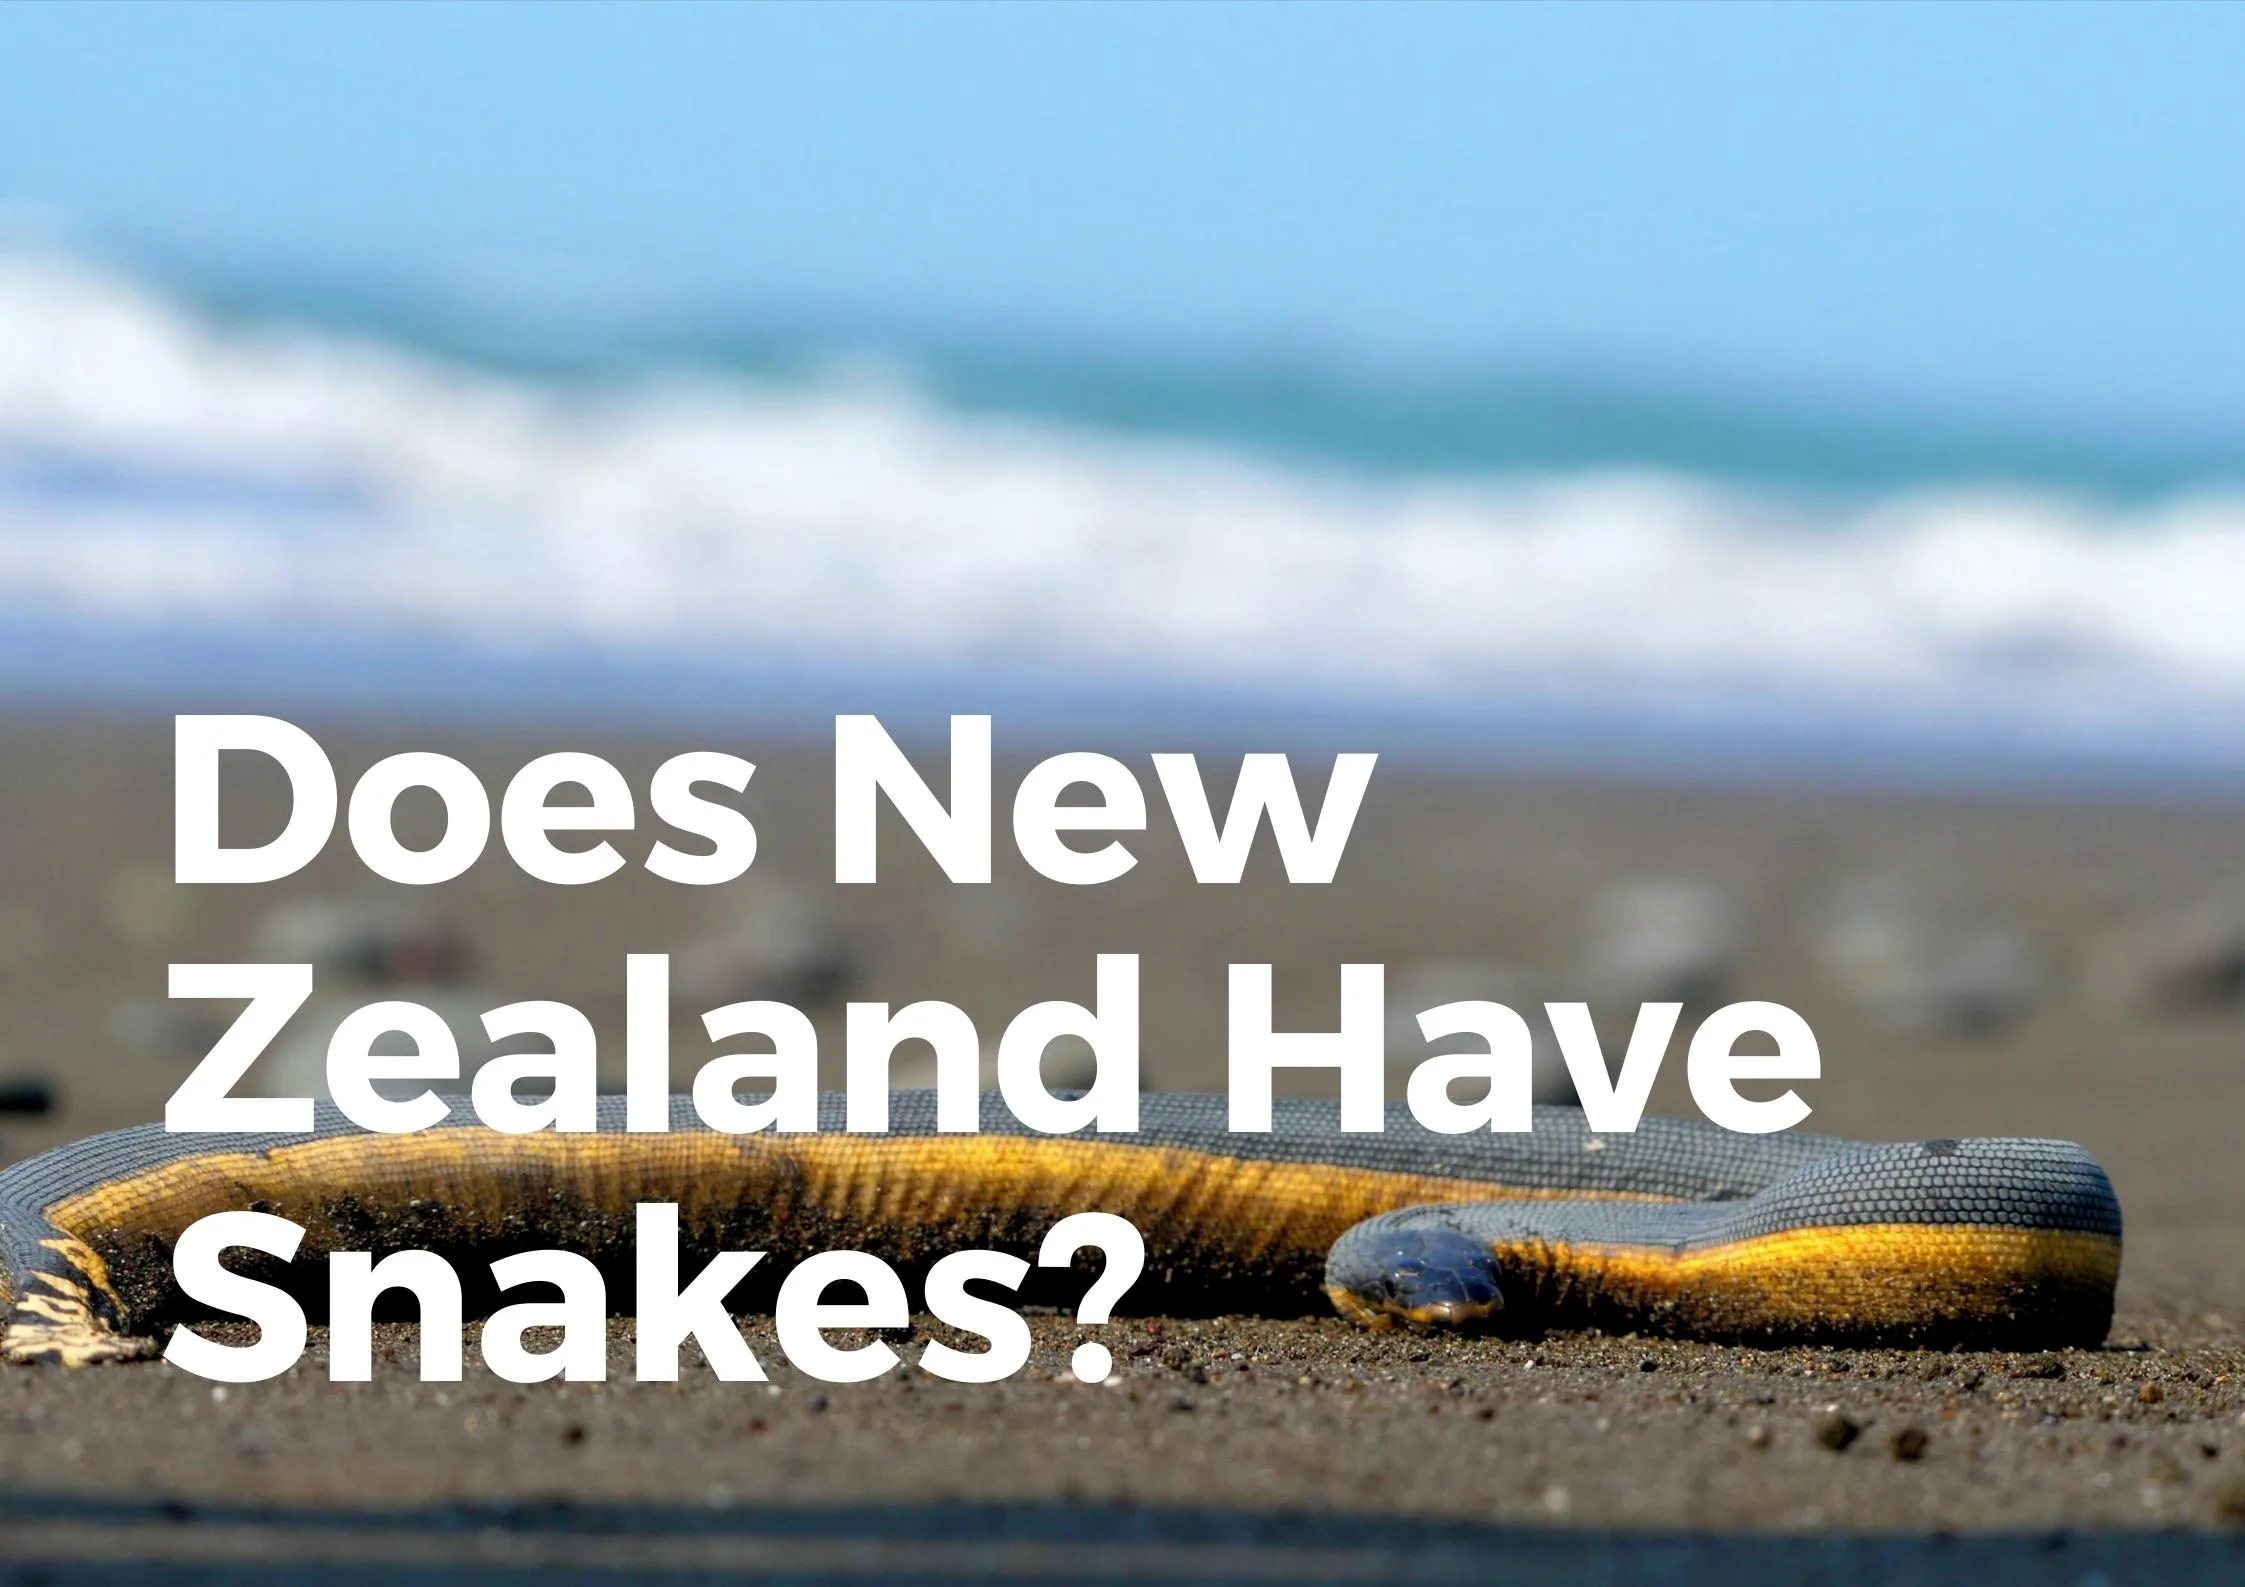 Are there Snakes in New Zealand?